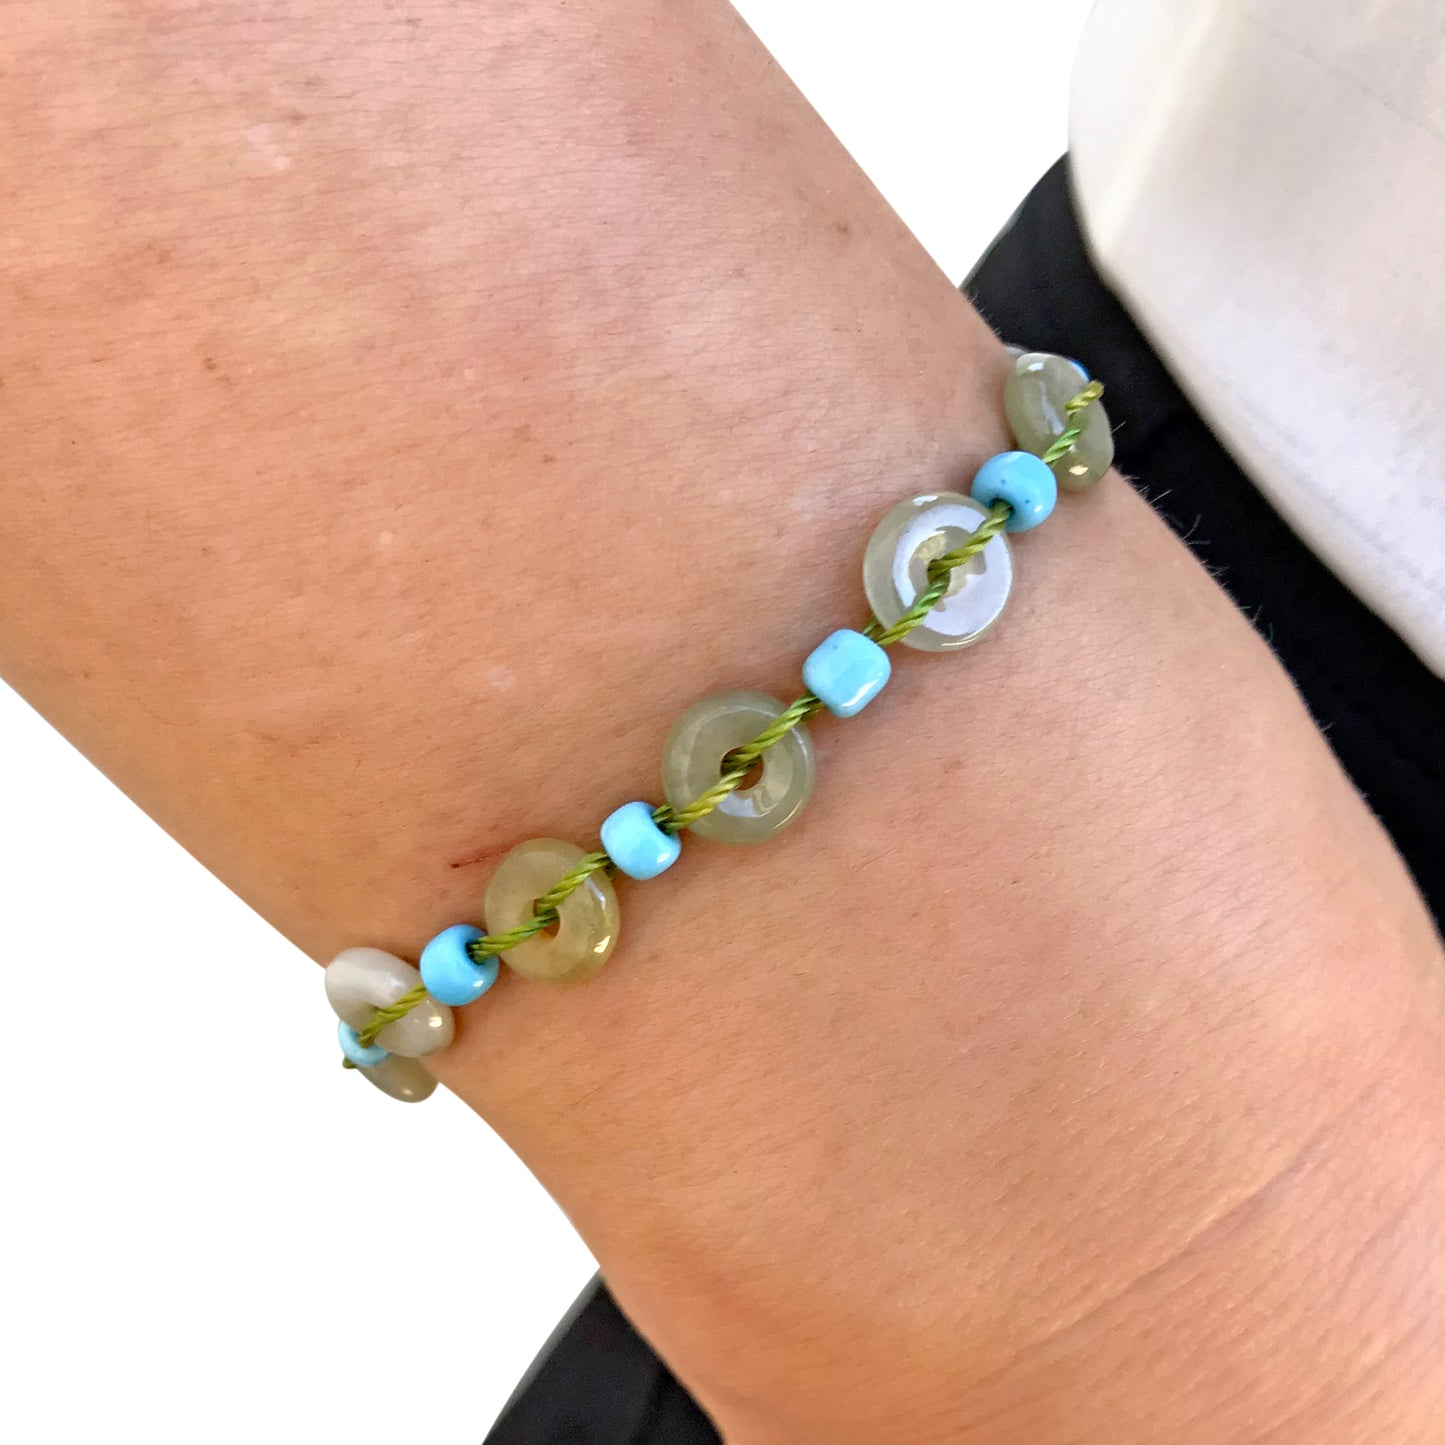 Find Balance and Harmony with the Endless Circle Bracelet